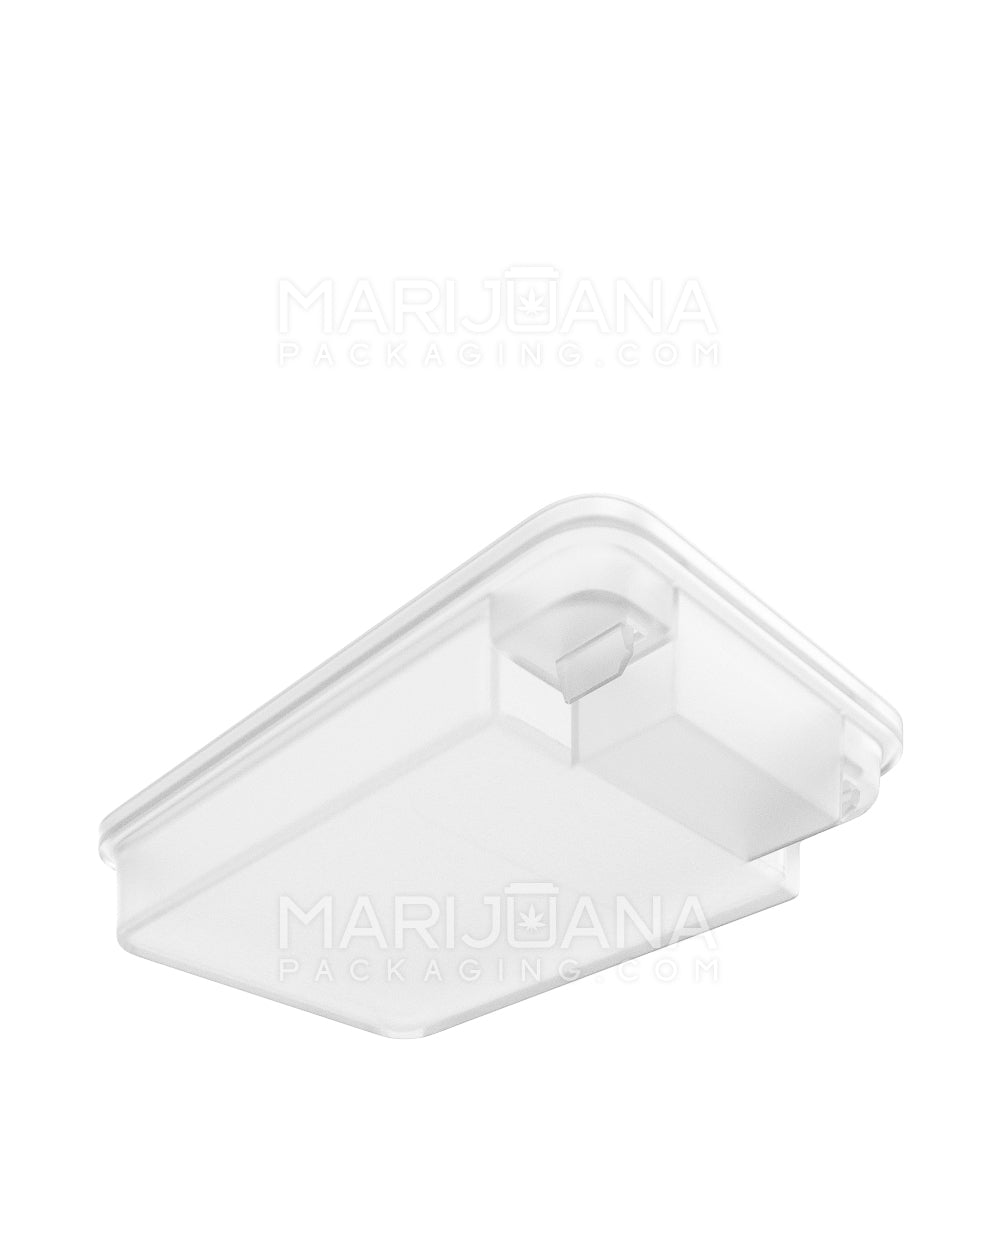 Child Resistant | Snap Box Edible & Pre-Roll Joint Case | Medium - Clear Plastic - 240 Count - 7